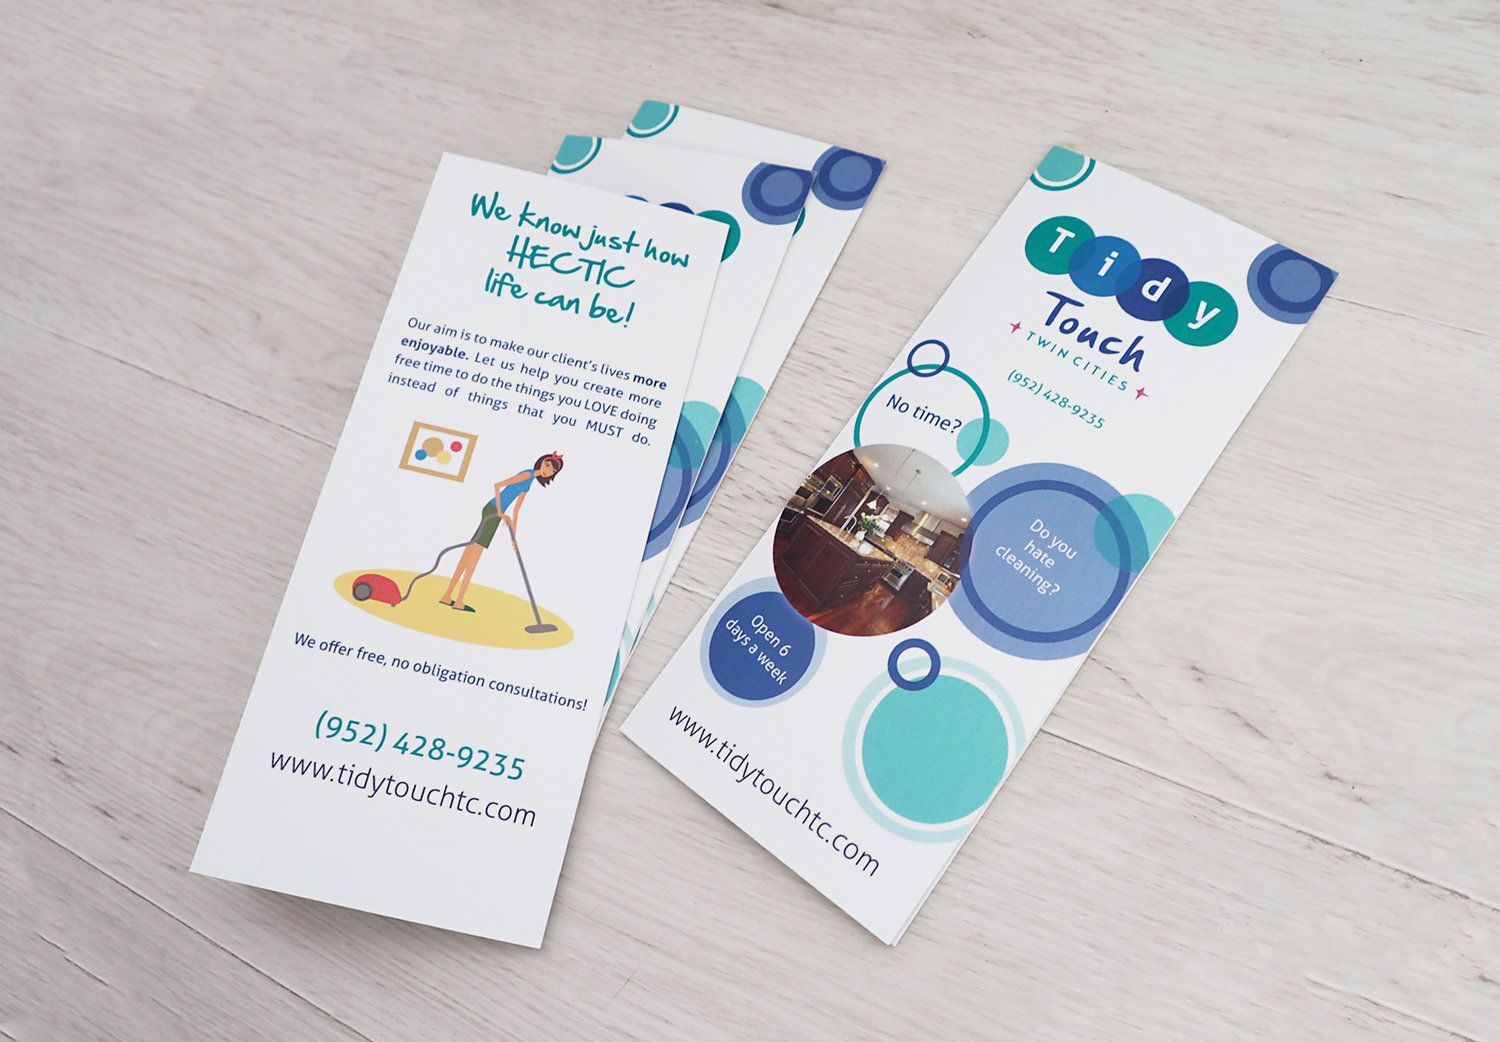  Informational Brochure - This is one of Tidy Touch’s go-to printed pieces when going on a consultation visit. The design was kept clean and stuck with the bubble theme.  